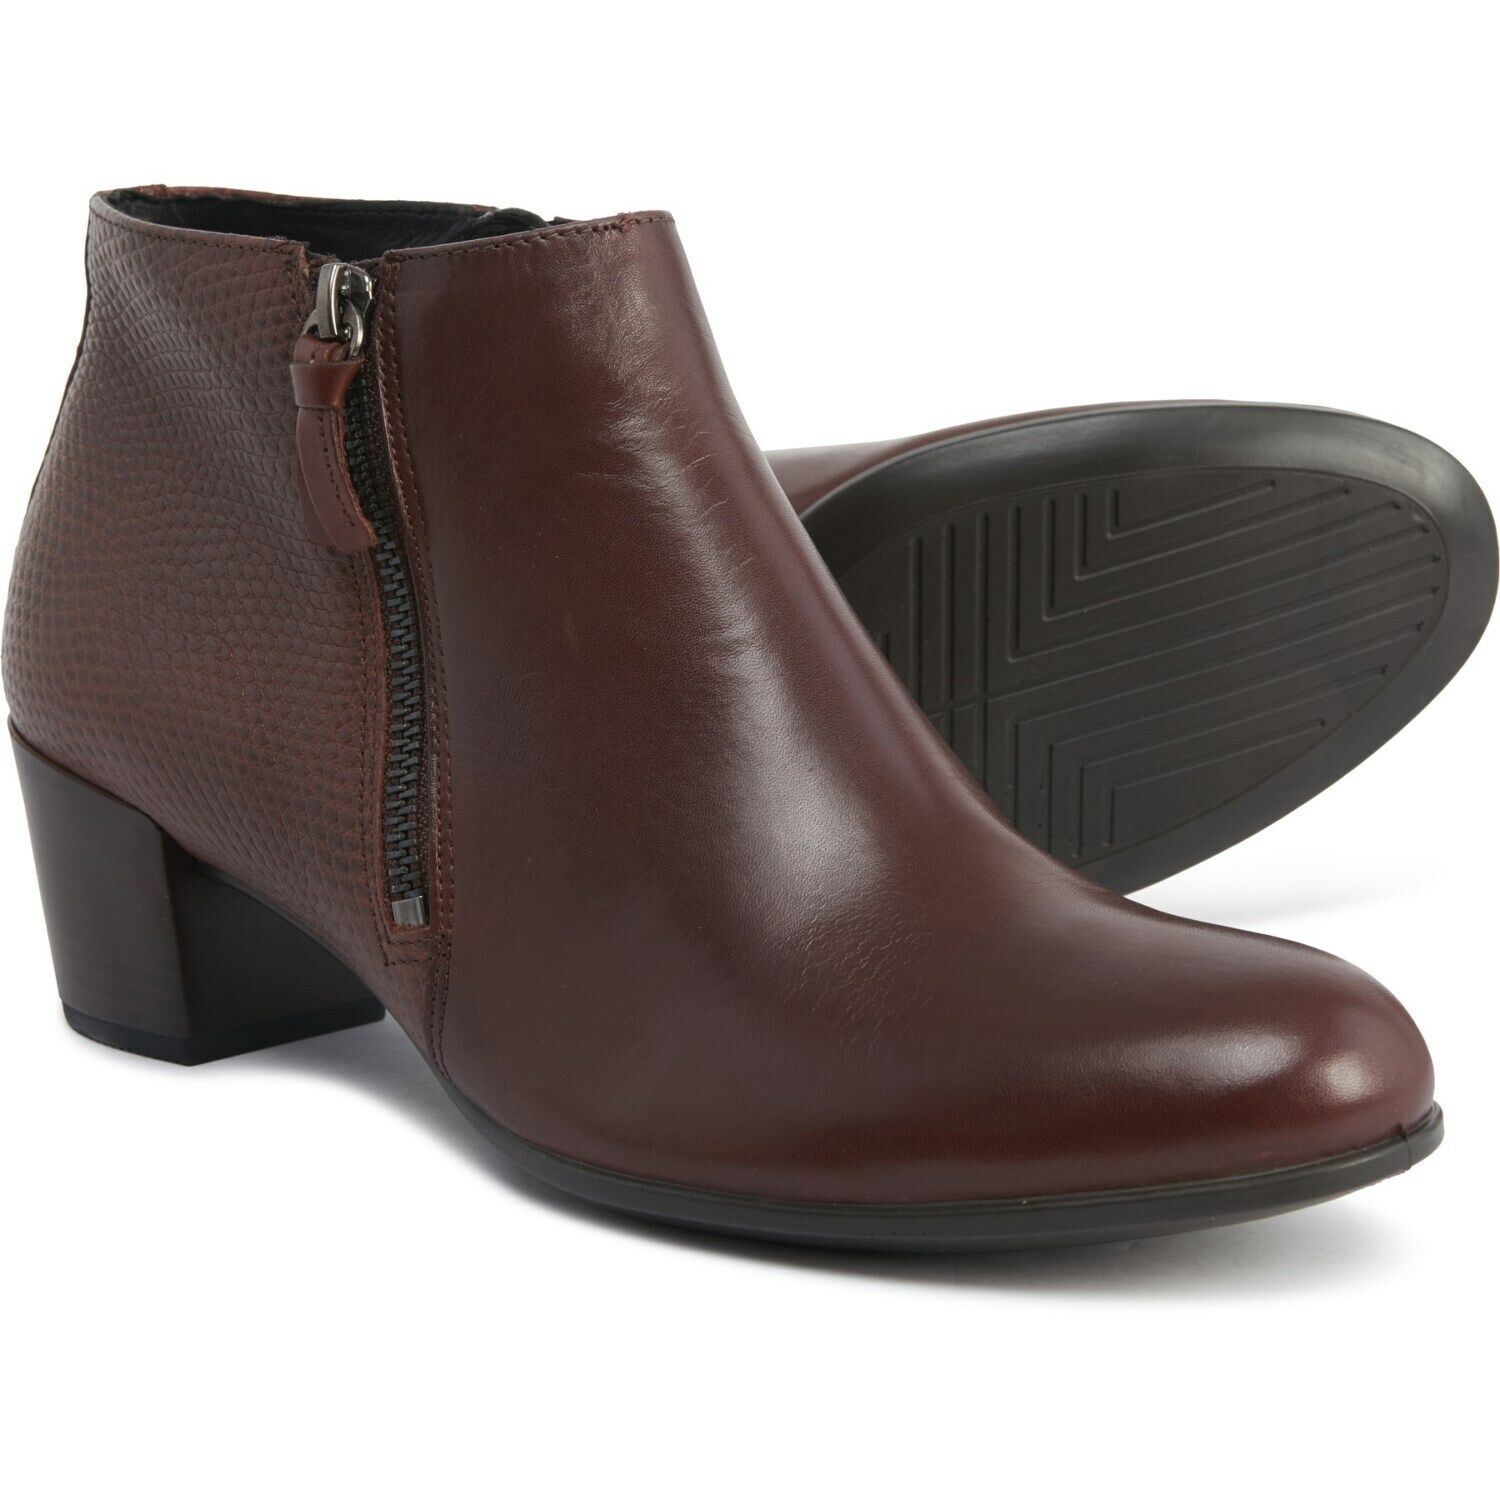 New Women`s ECCO Shape M 35 Ankle Boots Booties 273093 | eBay